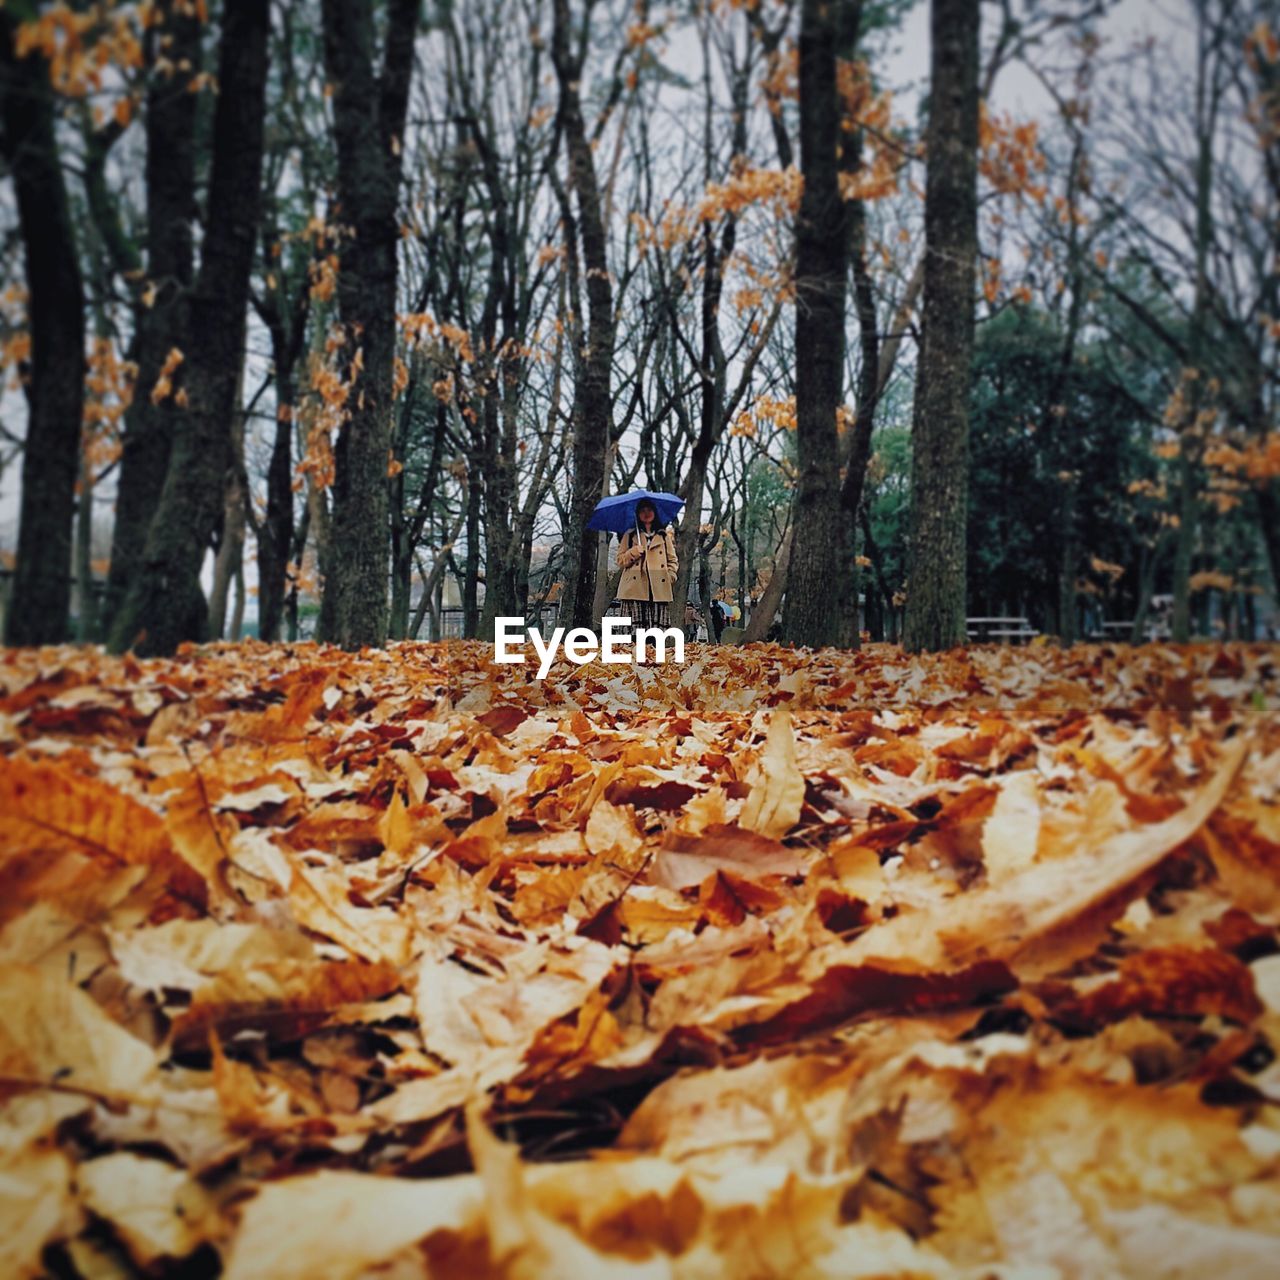 Surface level of fallen autumn leaves with woman holding umbrella in background at park